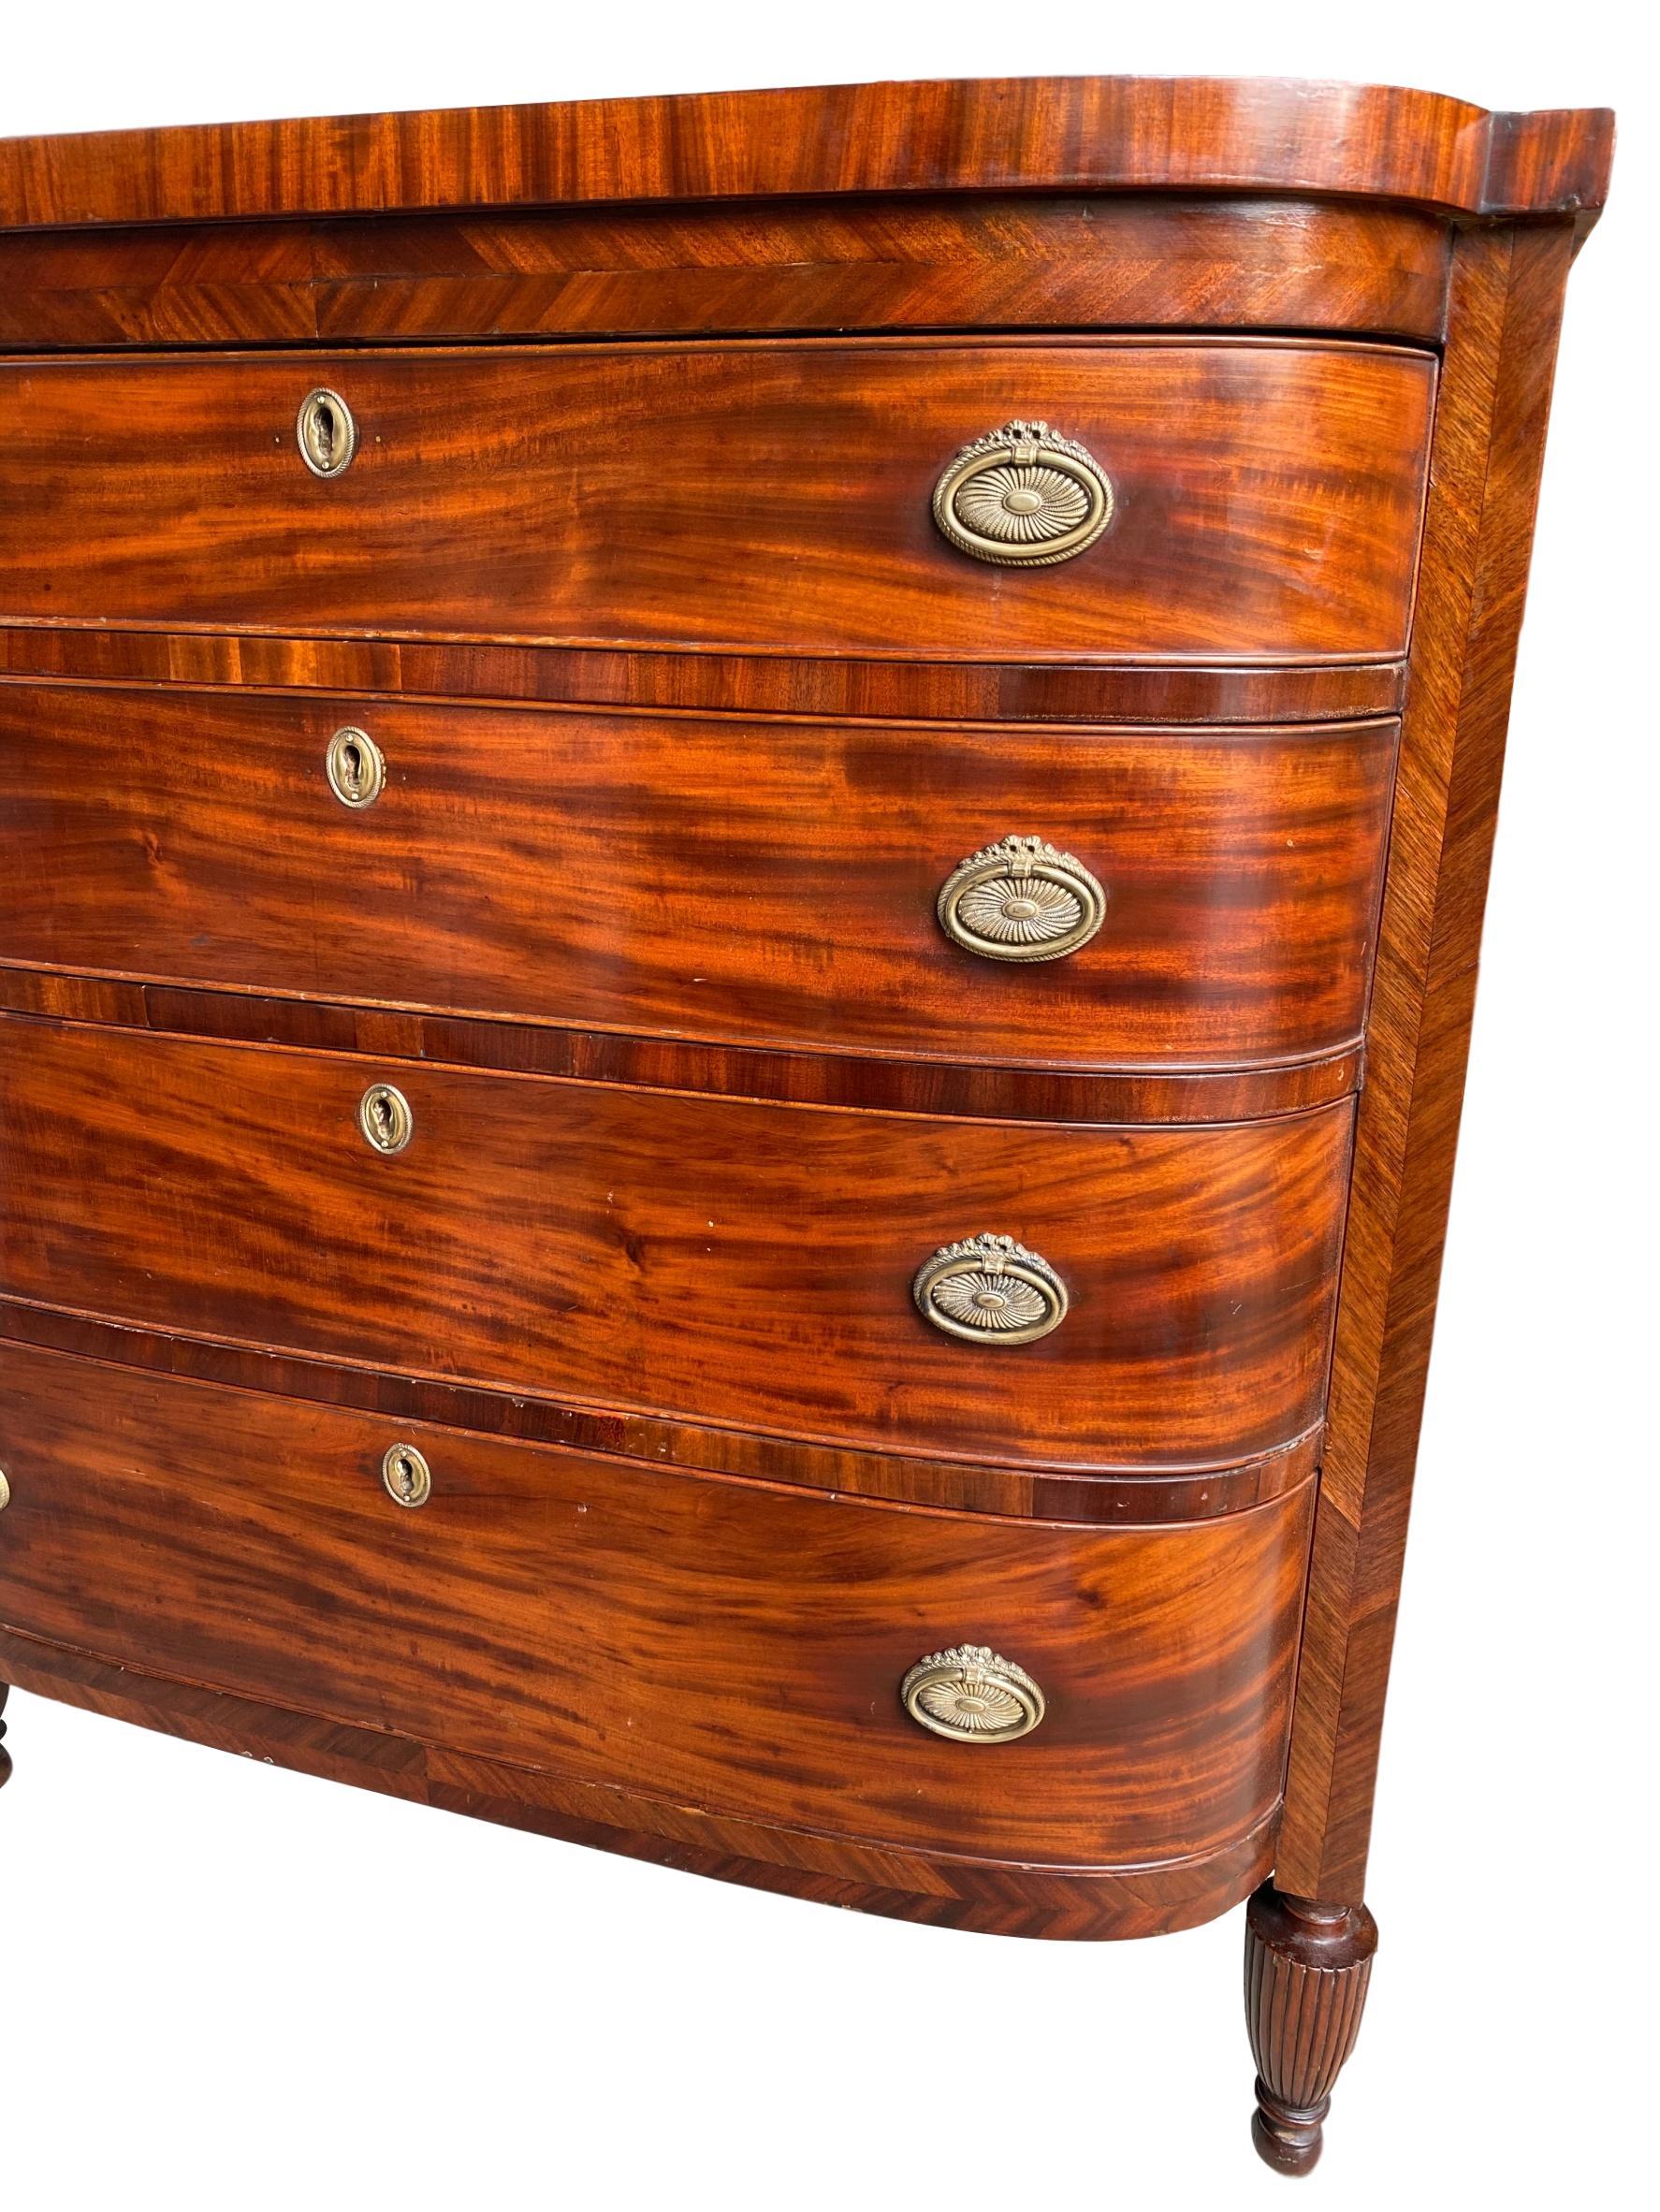 Victorian Flame Mahogany Bow-Front Chest-of-Drawers/Dresser, Scottish, circa 1860